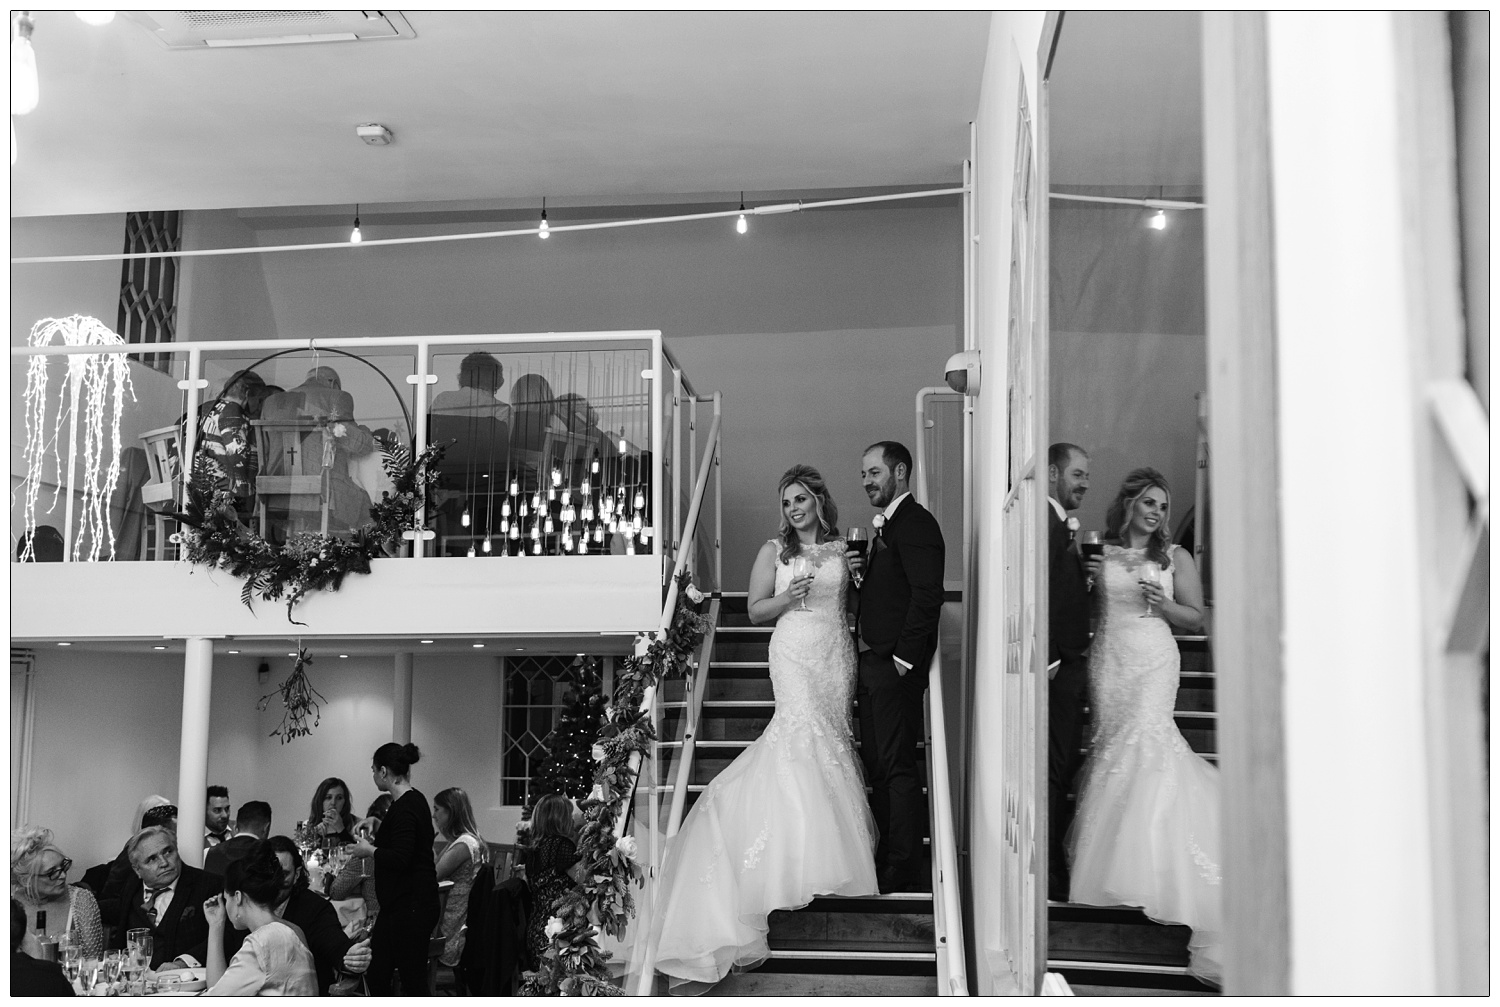 Bride and groom on the stairs of The Old Parish Rooms. They are reflected in a mirror. They are holding drinks and looking out over the tables of guests.